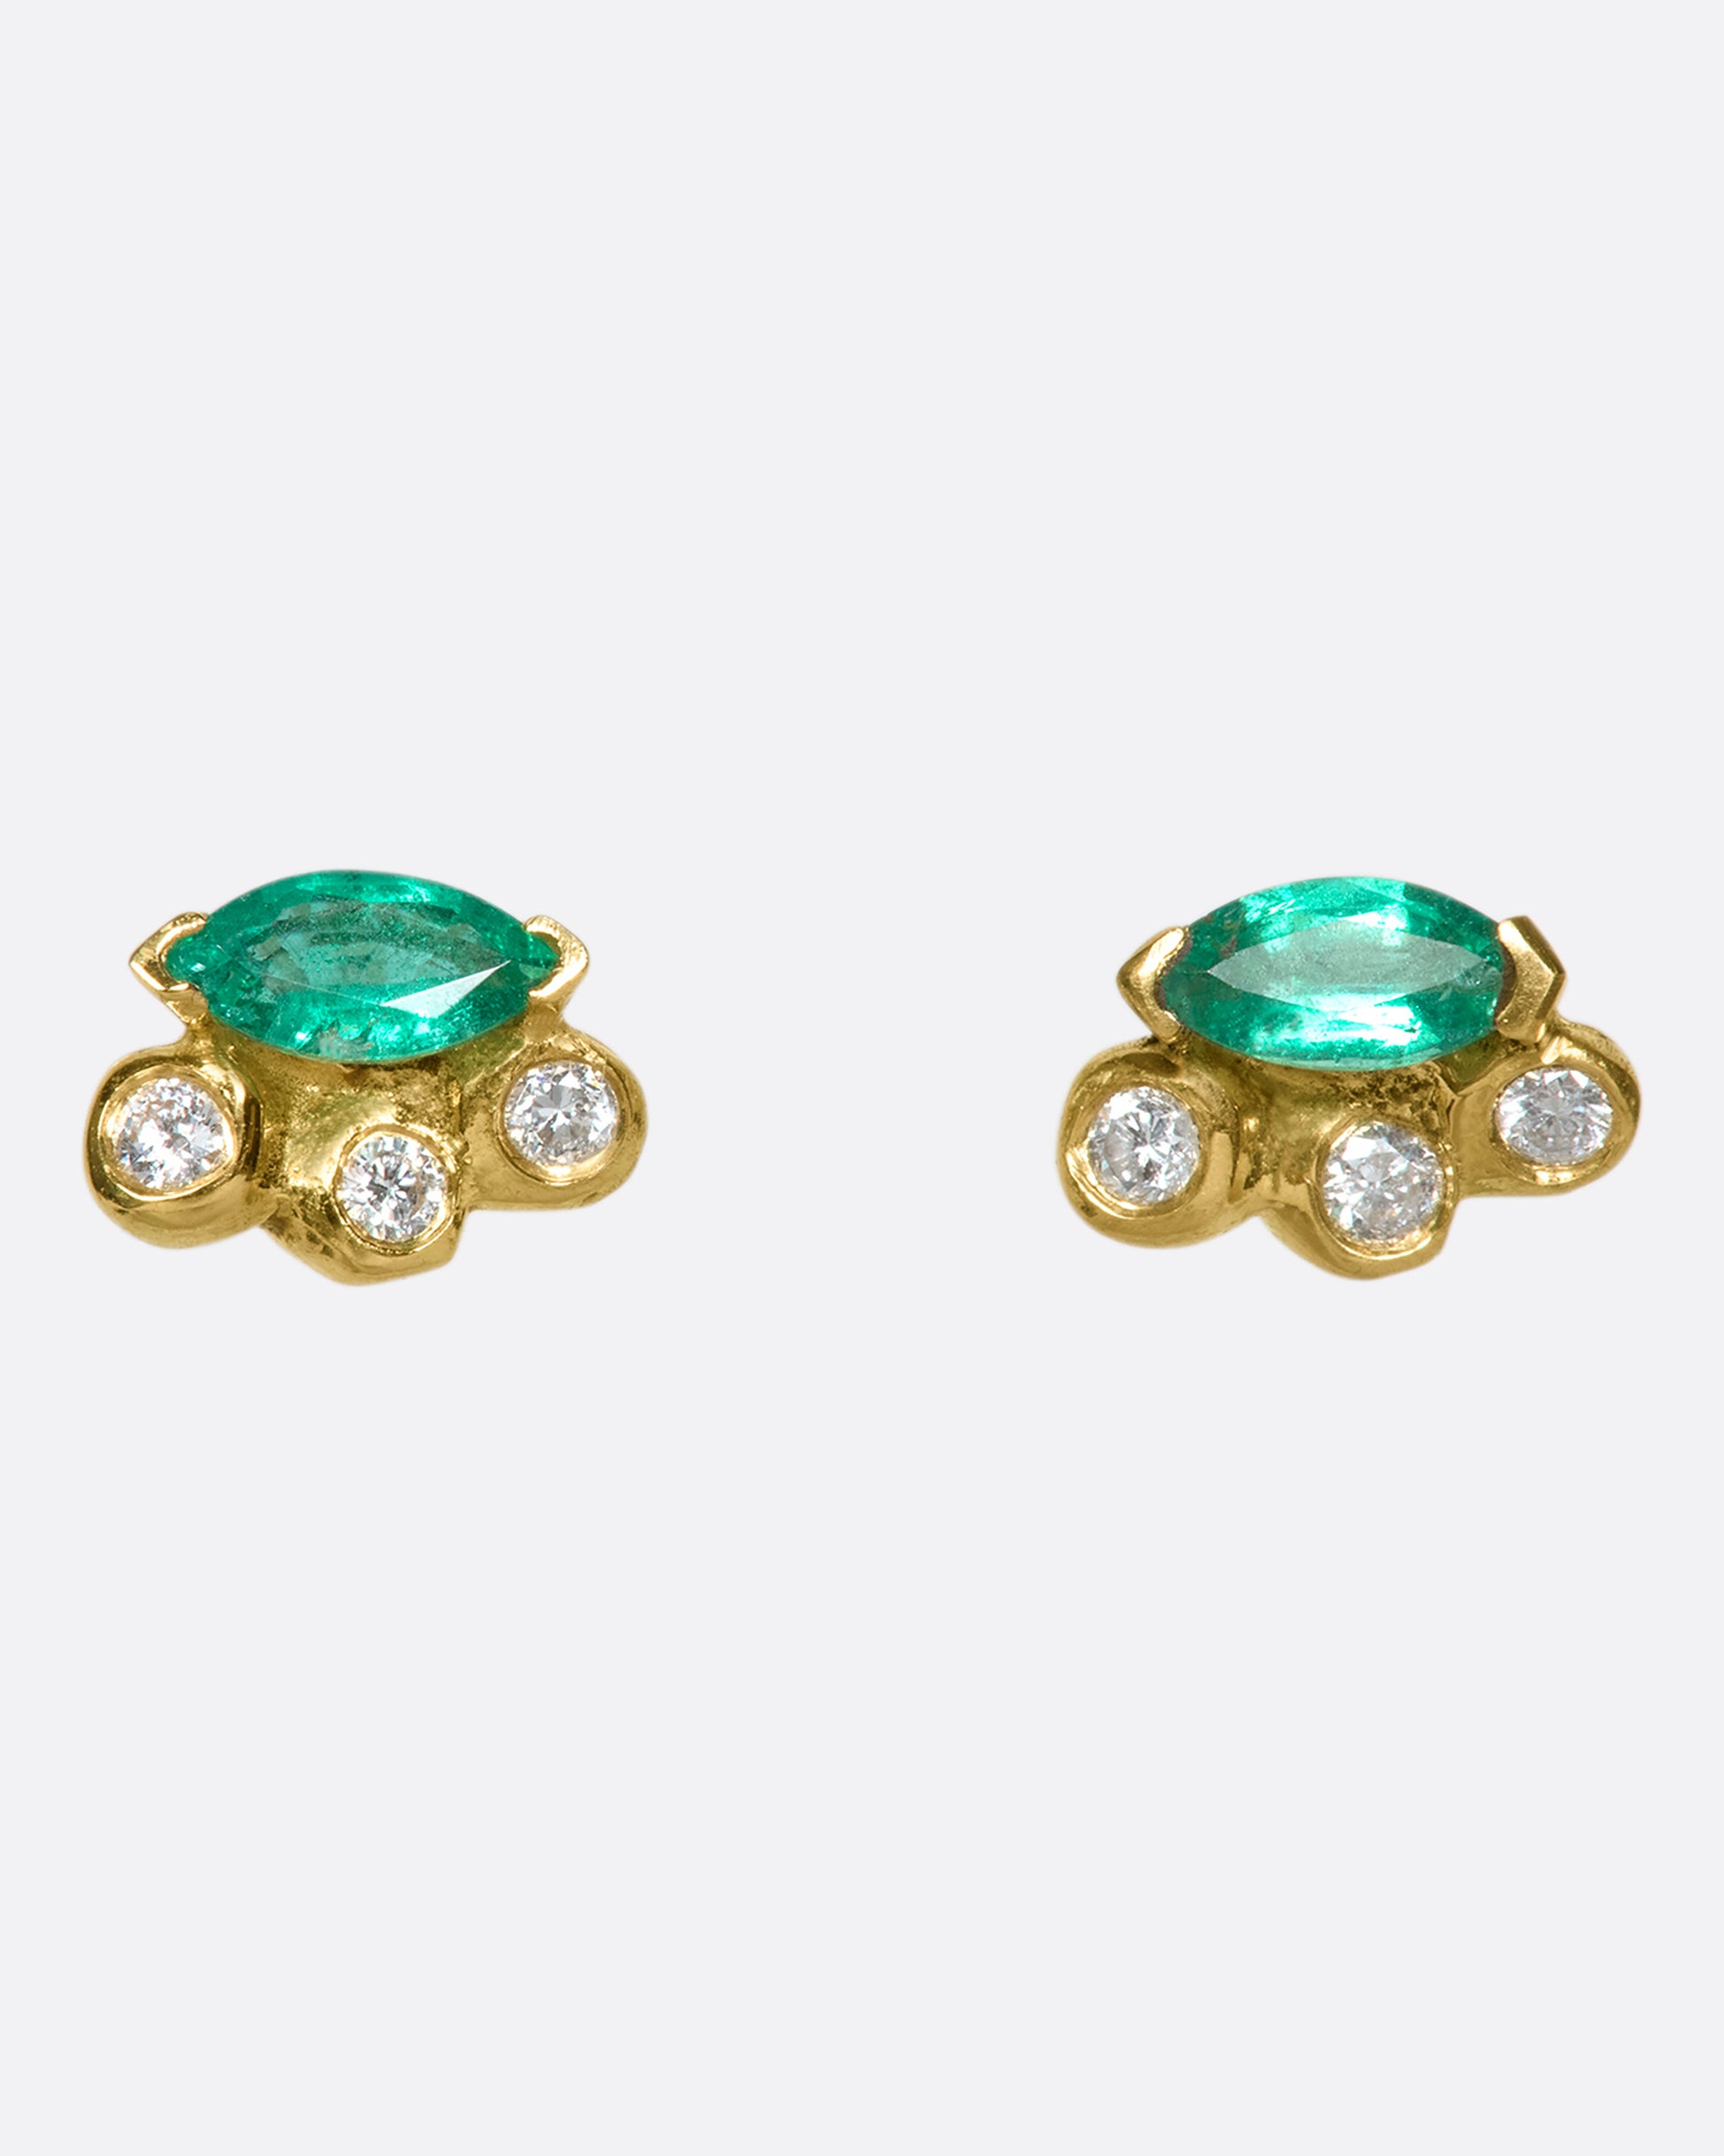 Marquise emerald and diamond studs wrapped in 18k gold